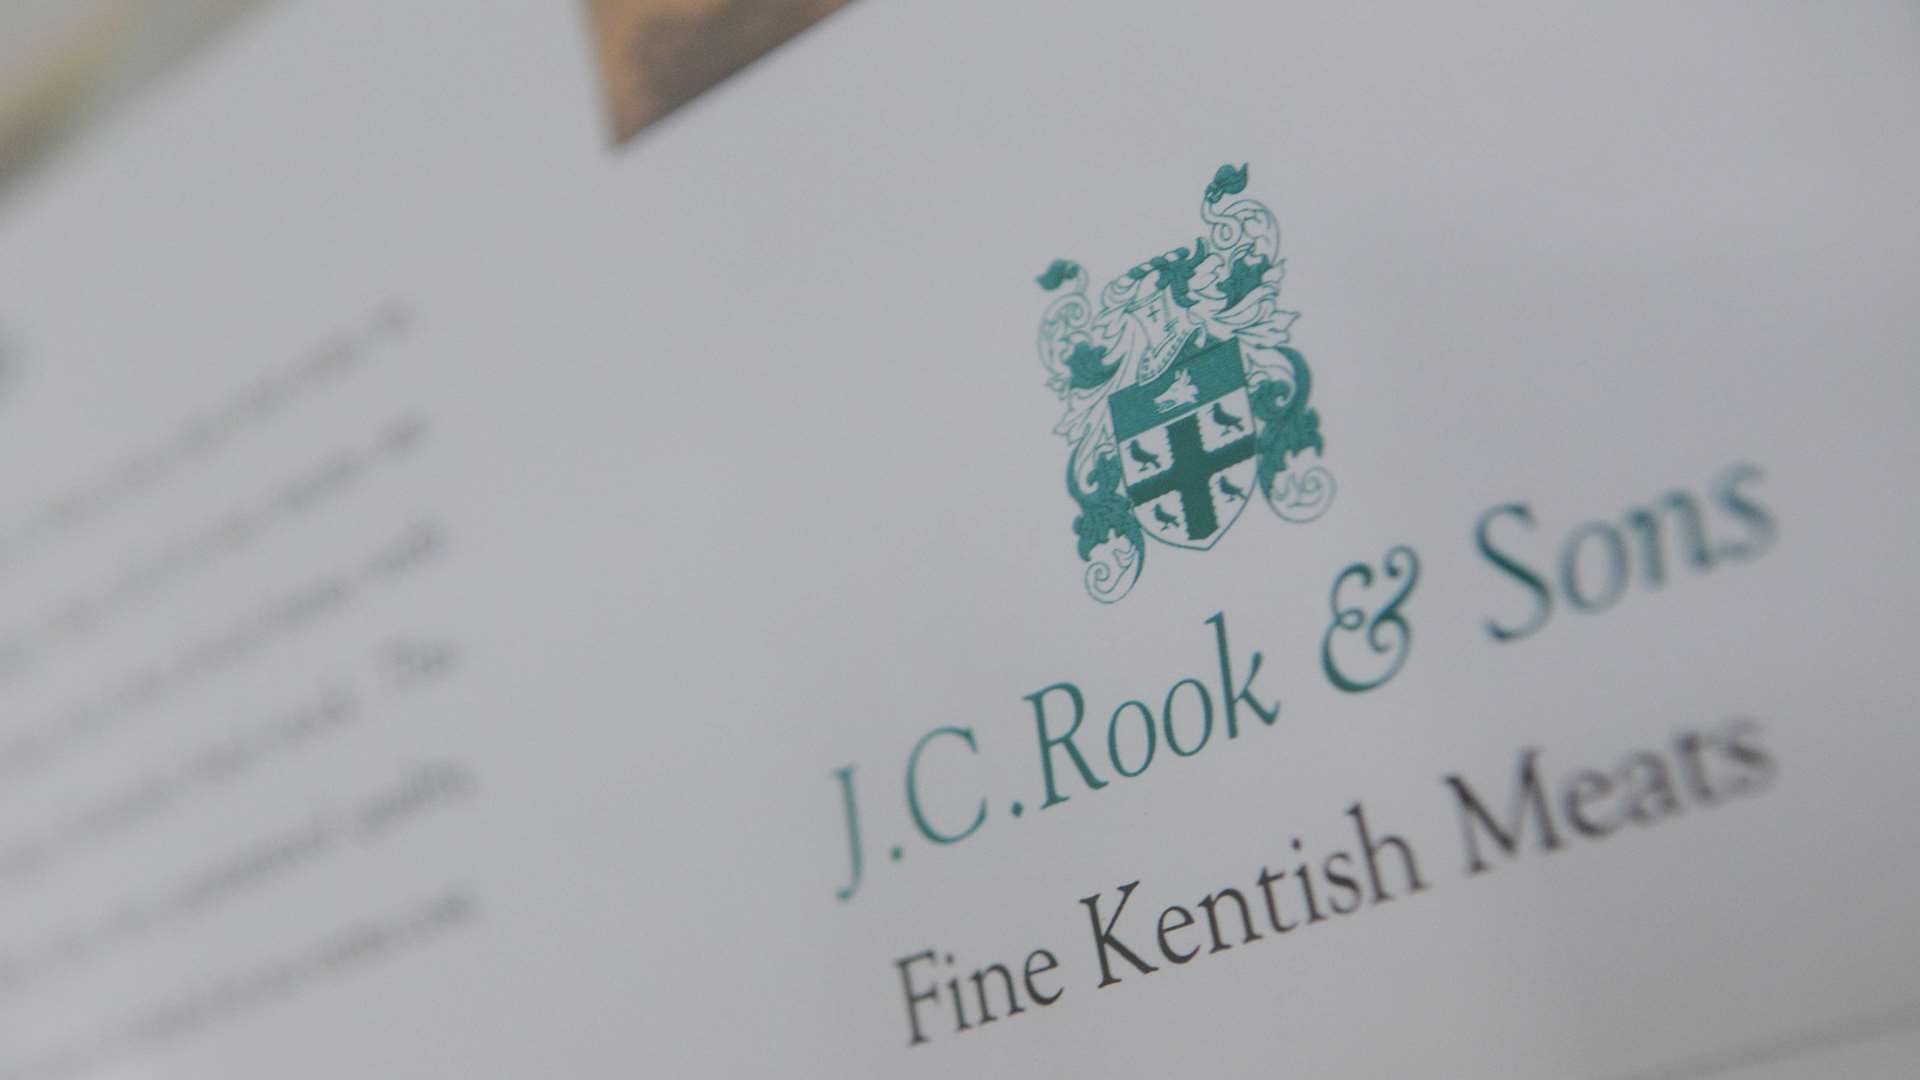 J C Rook and Sons Ltd must now pay £34,610